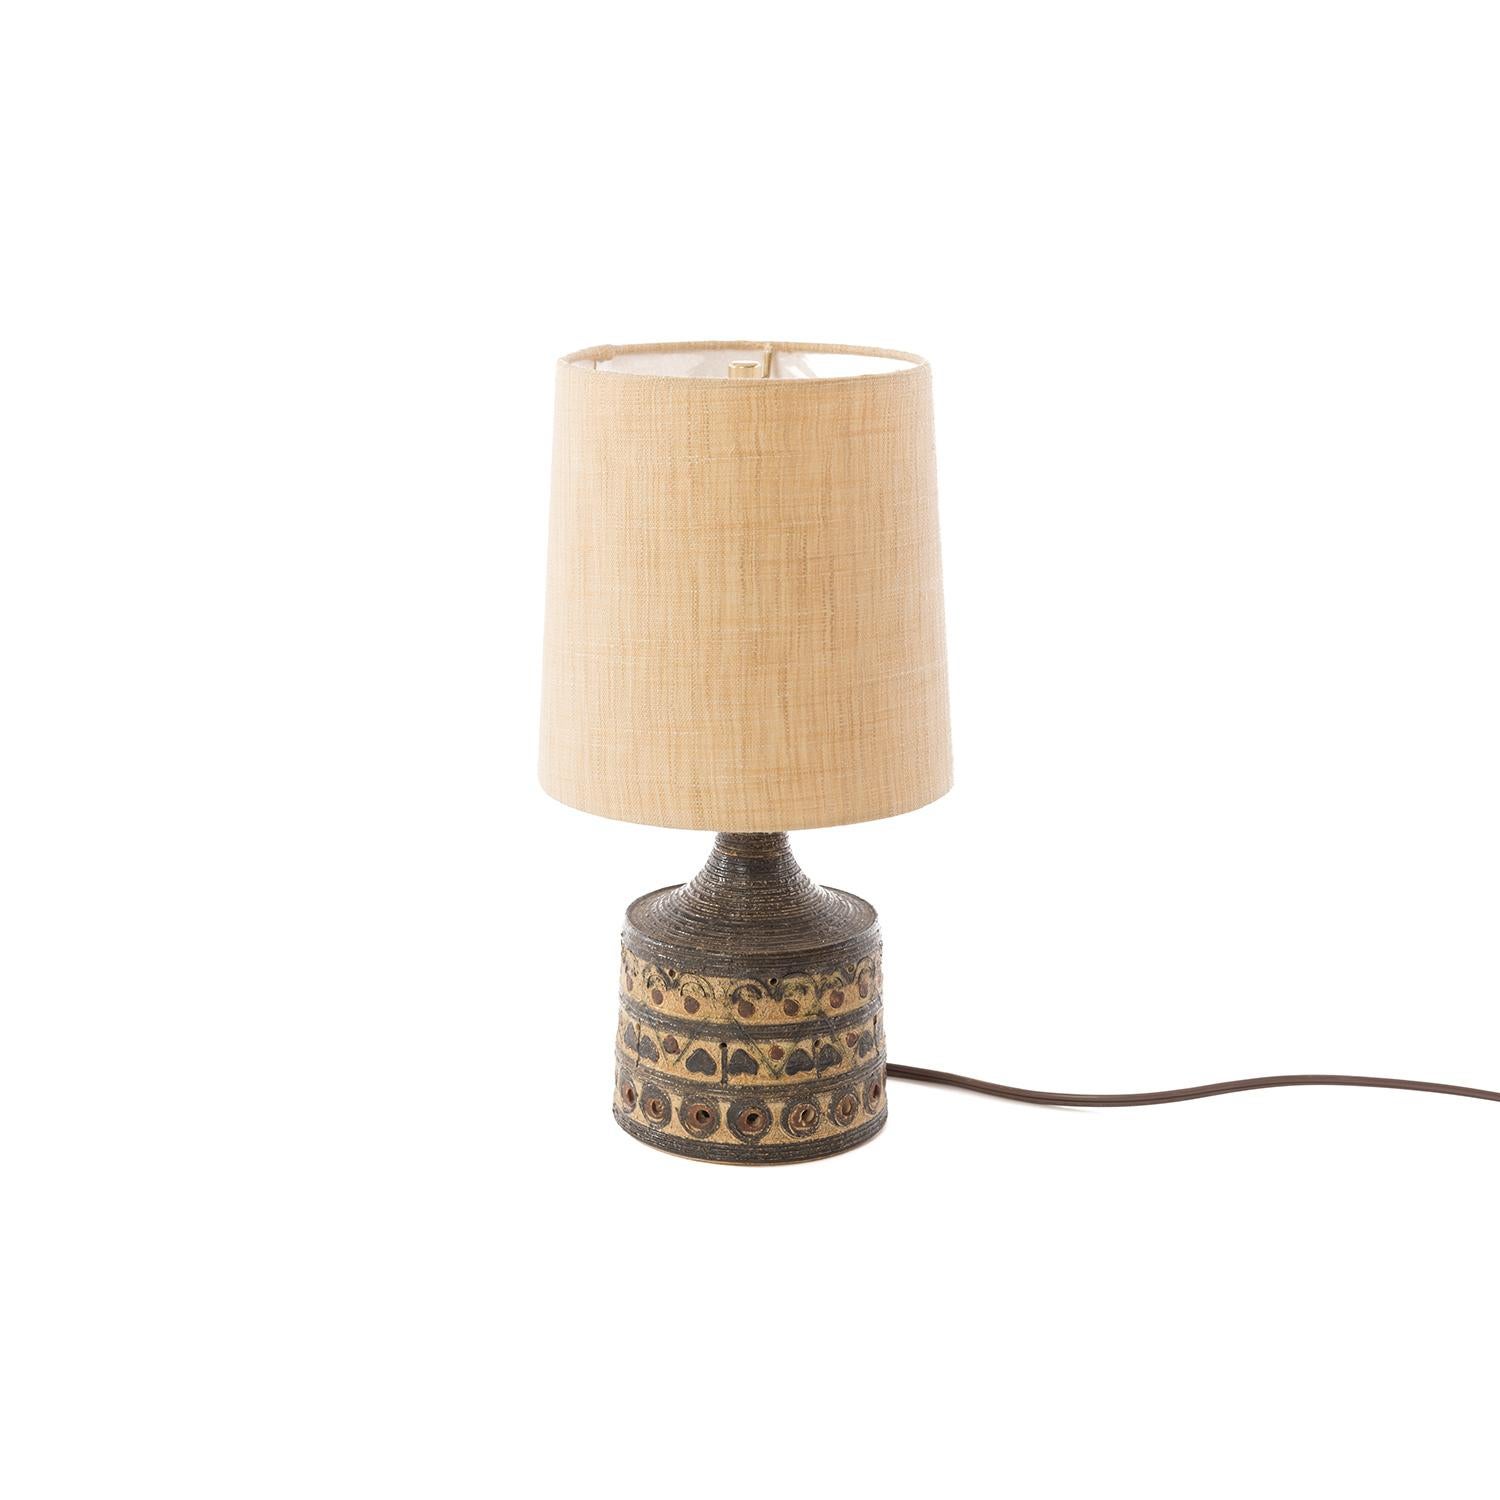 This mid-sized table lamp has it all, bullseye reliefs, swirls and upside down hearts. Sand and deep brown tones in the glaze. All topped off with a new natural fiber flax shade. From Denmark. Lamp has been updated with North American wiring or plug